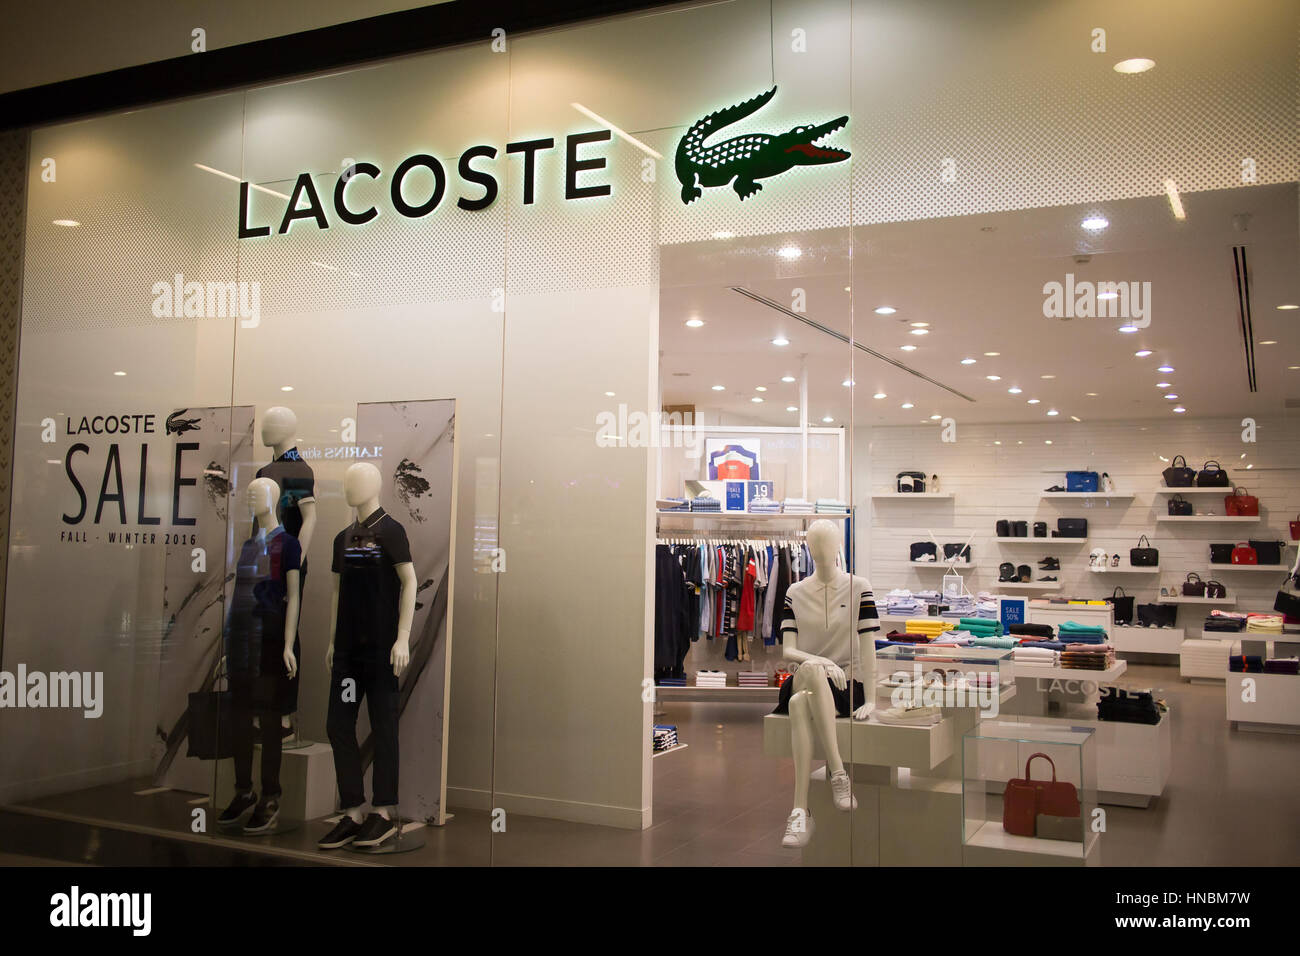 izod lacoste outlet store